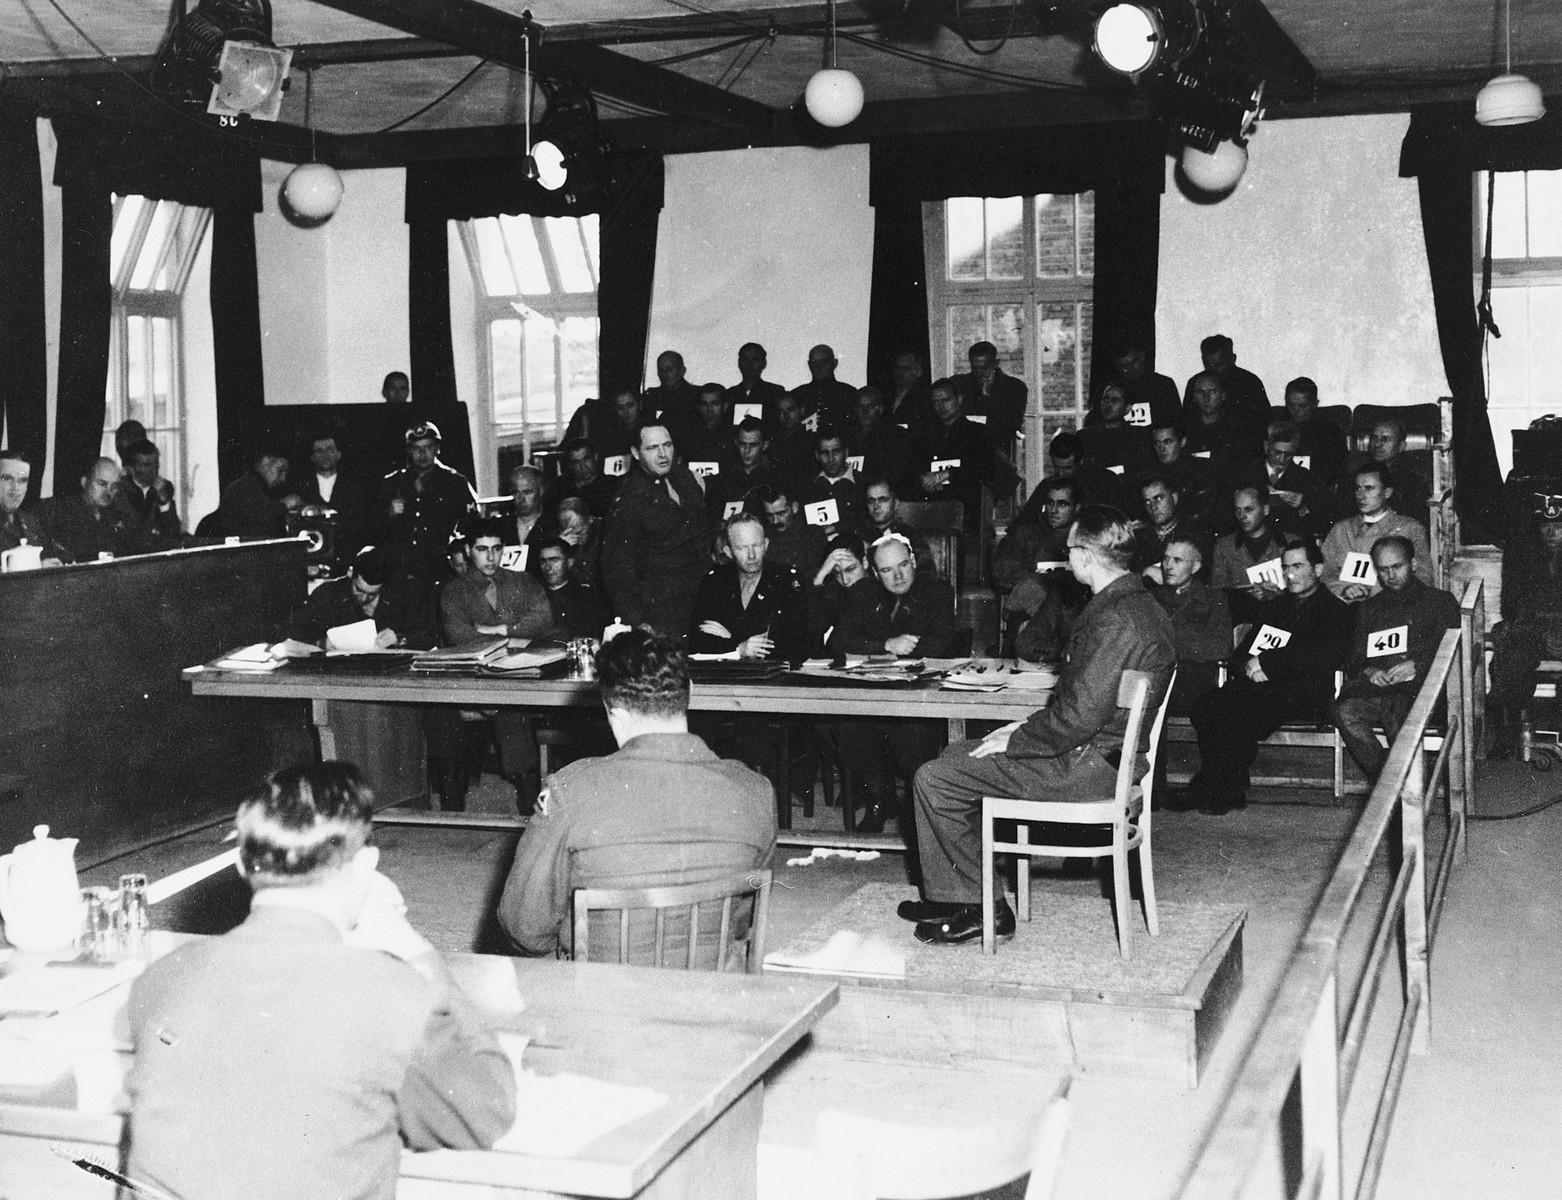 View of the courtroom and proceedings of the first Dachau trial.